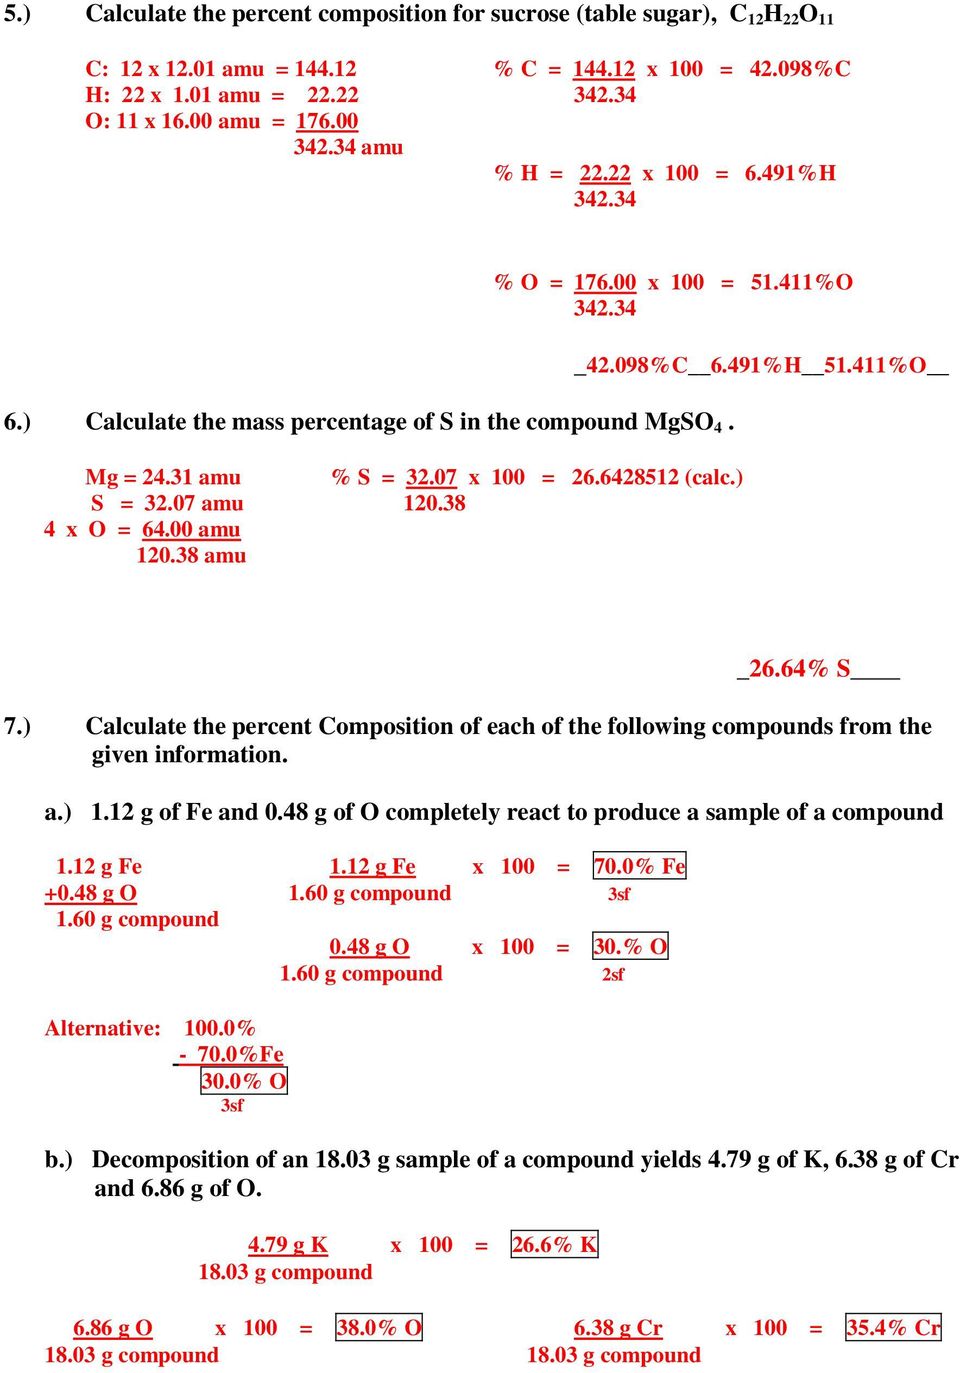 Worksheet # 11 Graham/11 Due - PDF Free Download Throughout Percent Composition Worksheet Answers